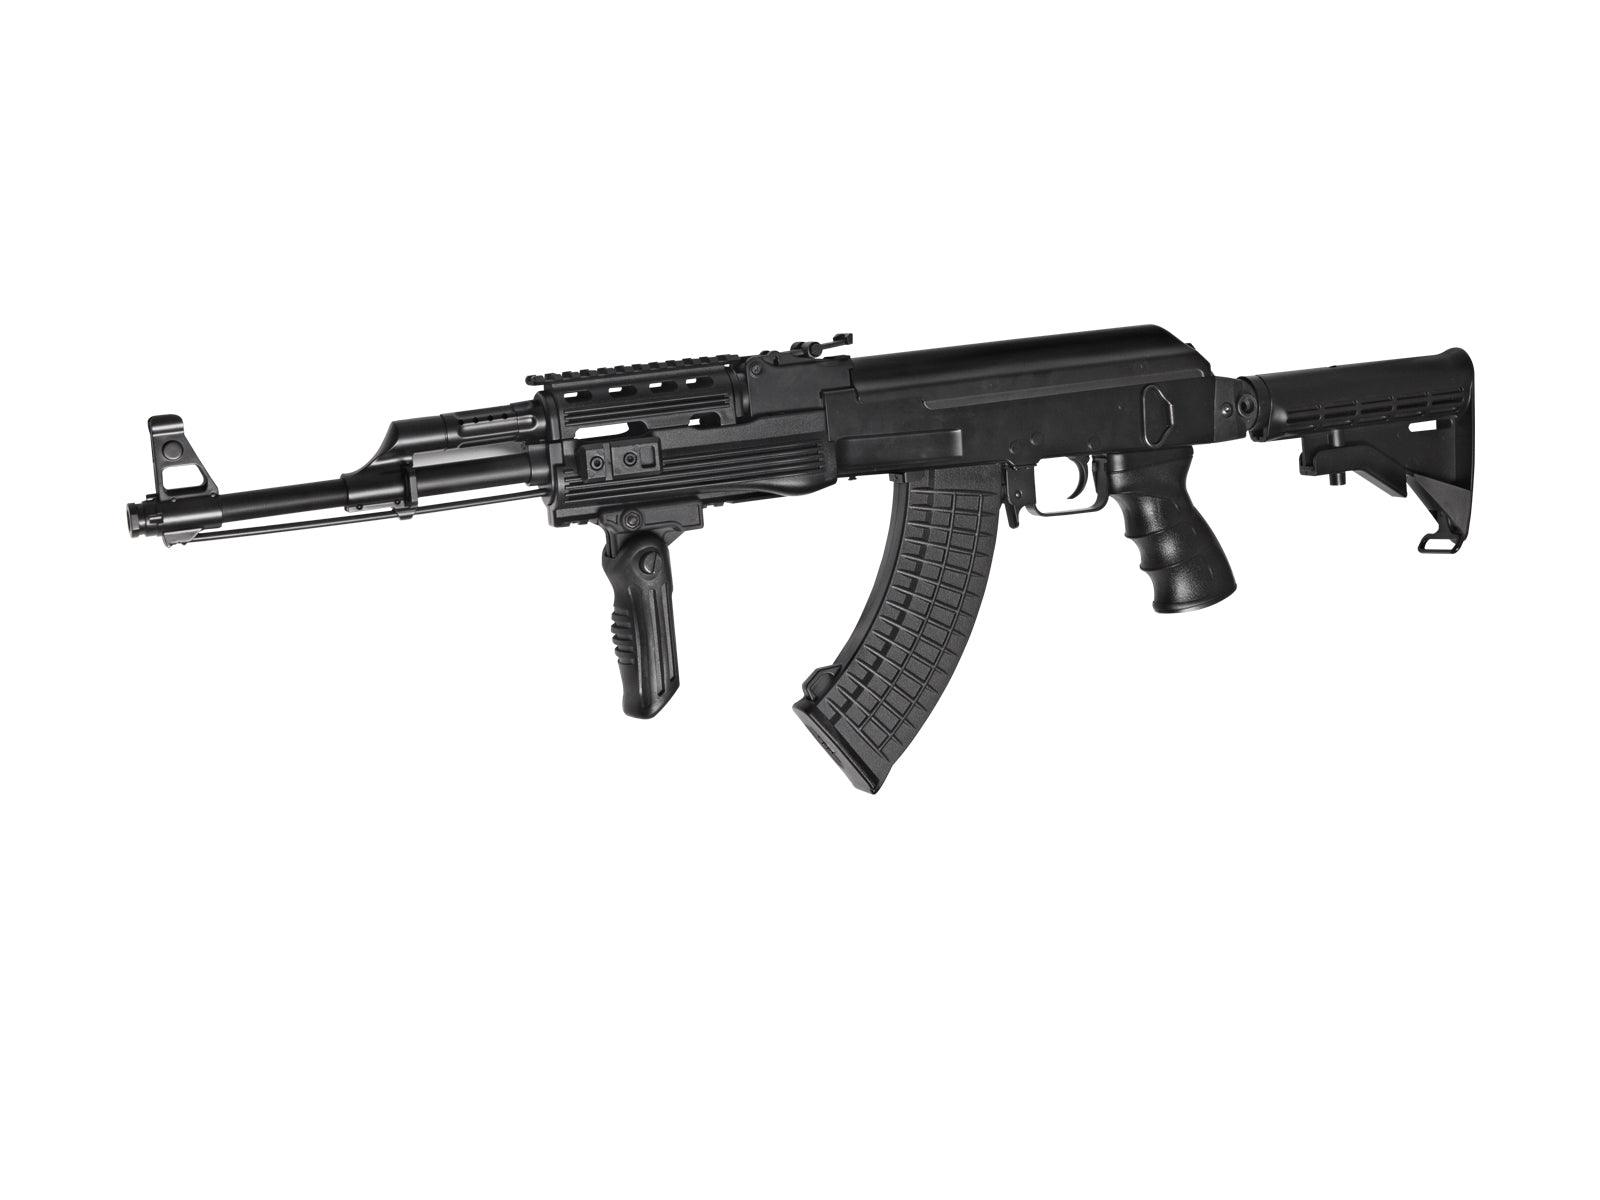 ASG Fully Licensed Arsenal AR-M7T Polymer Airsoft AEG, Airsoft